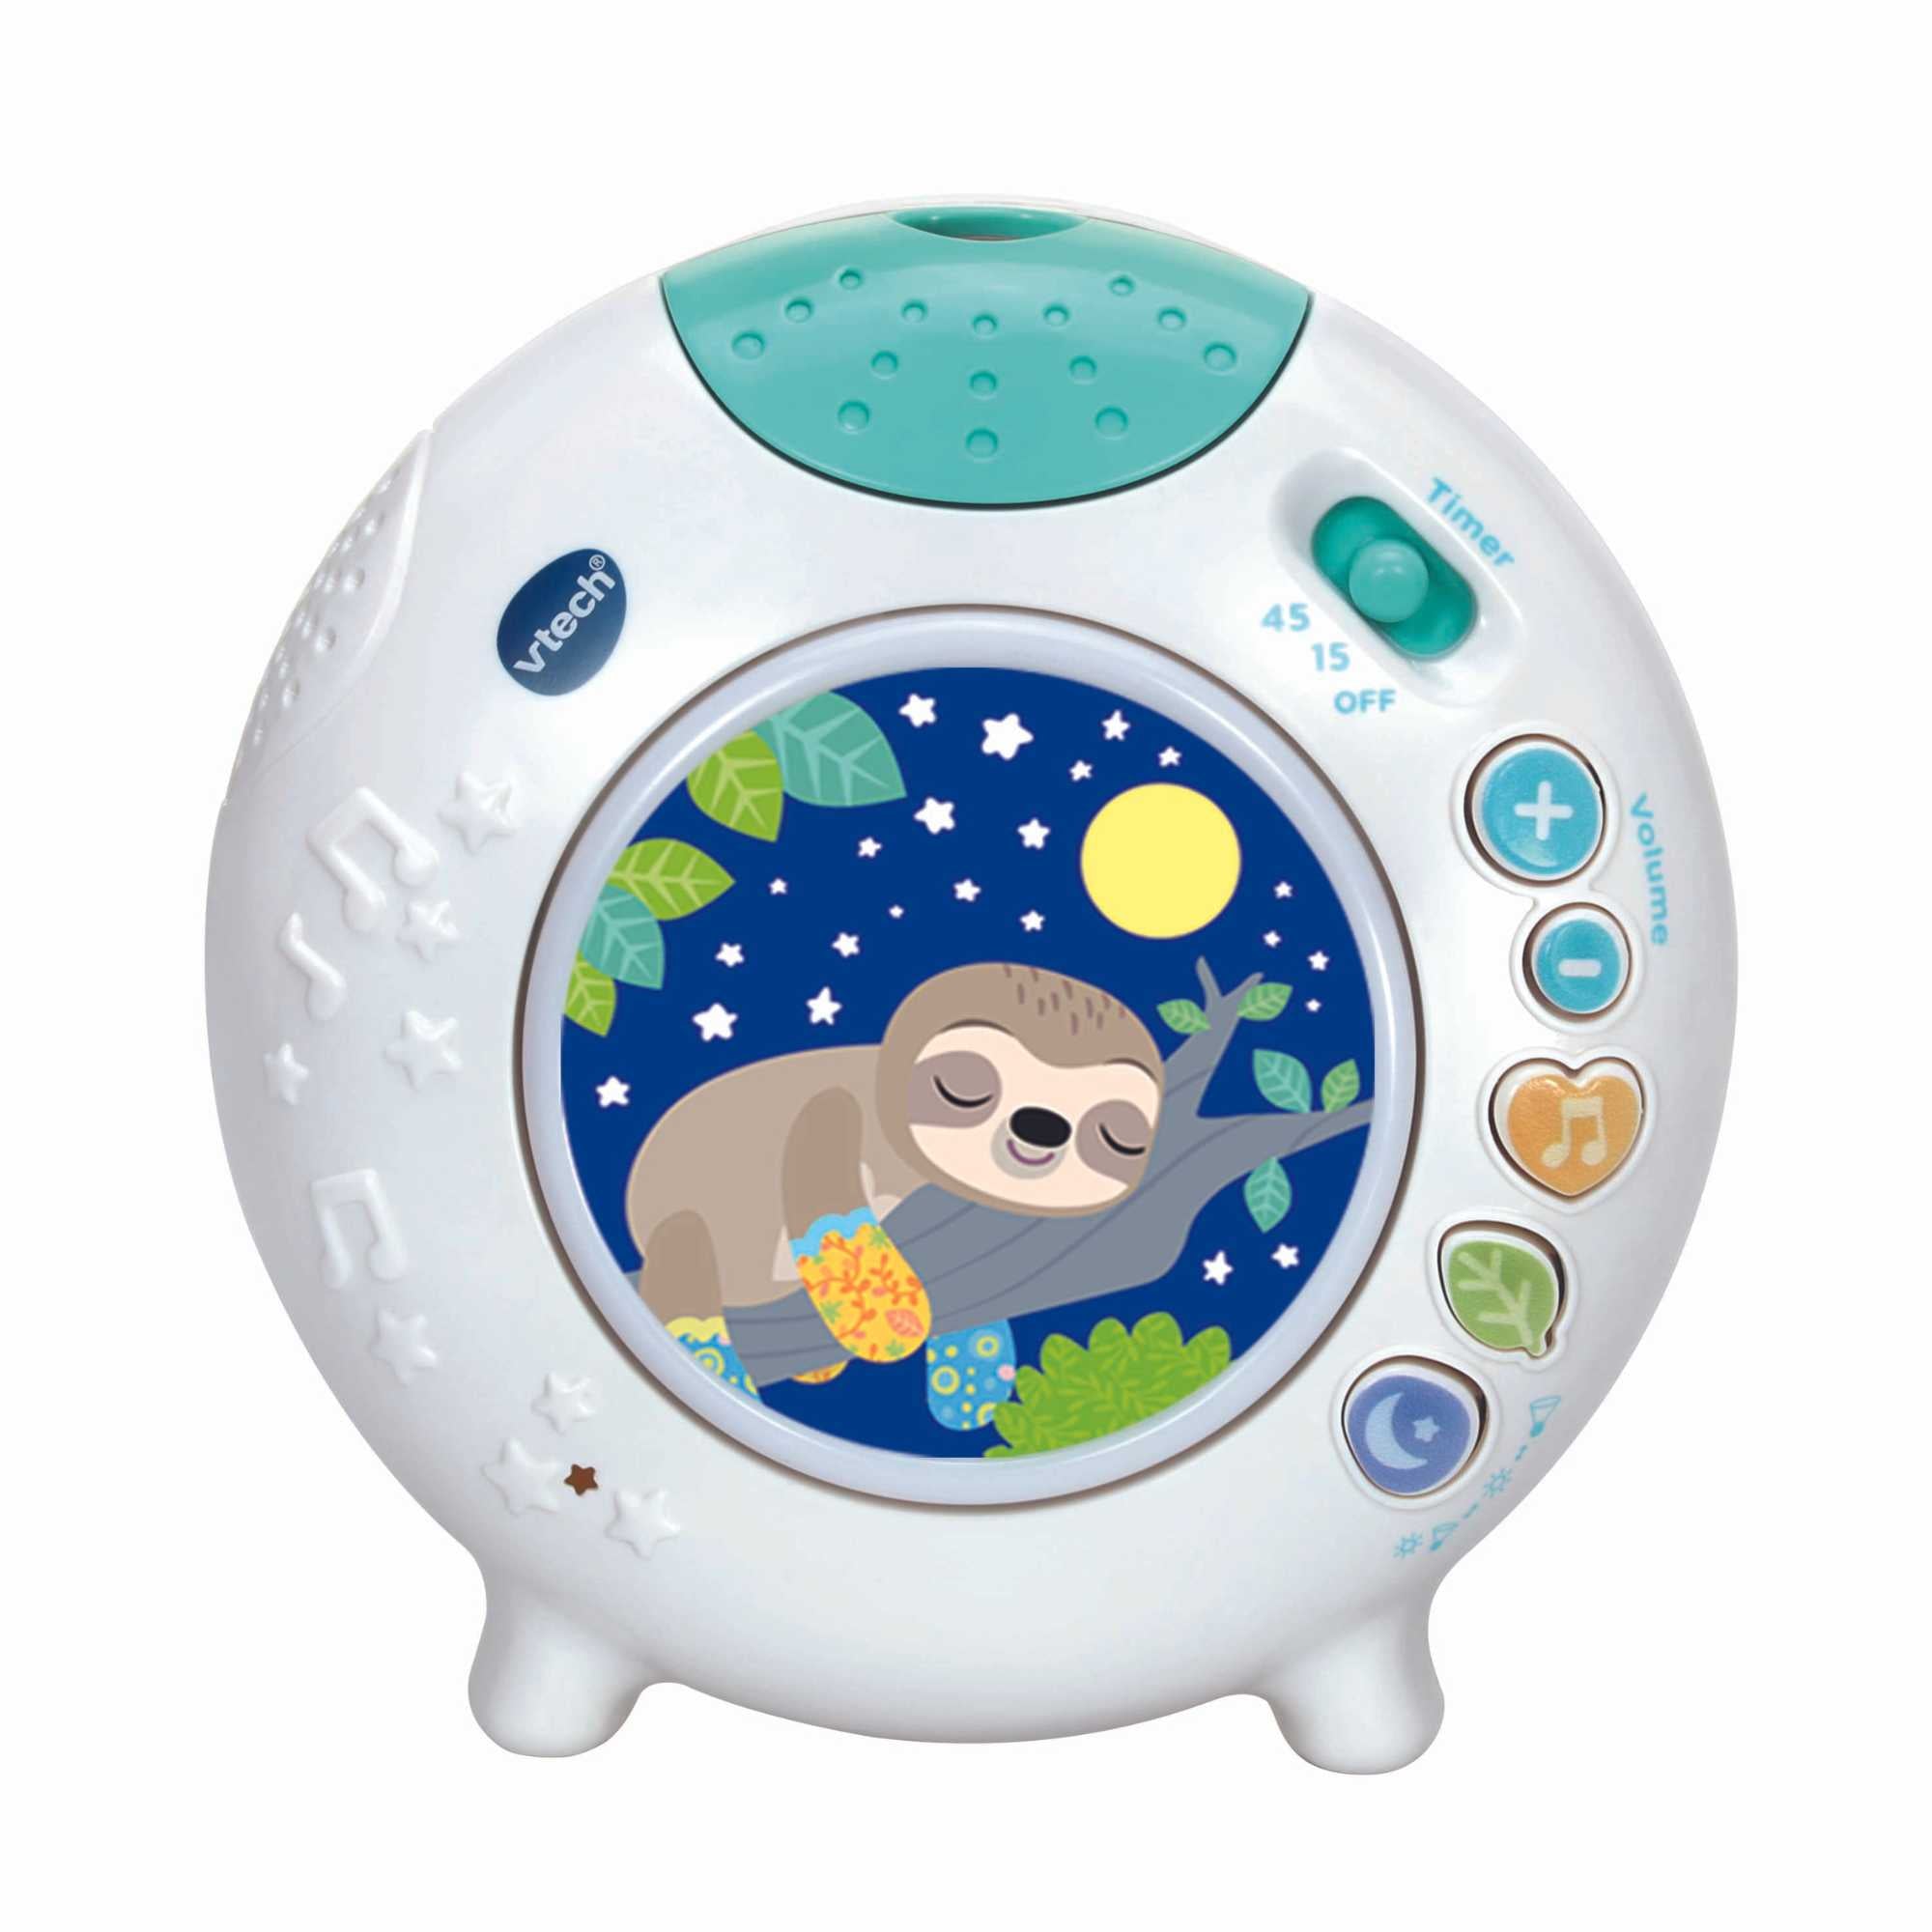 Photos - Role Playing Toy Vtech Sleepy Sloth Cot Light 